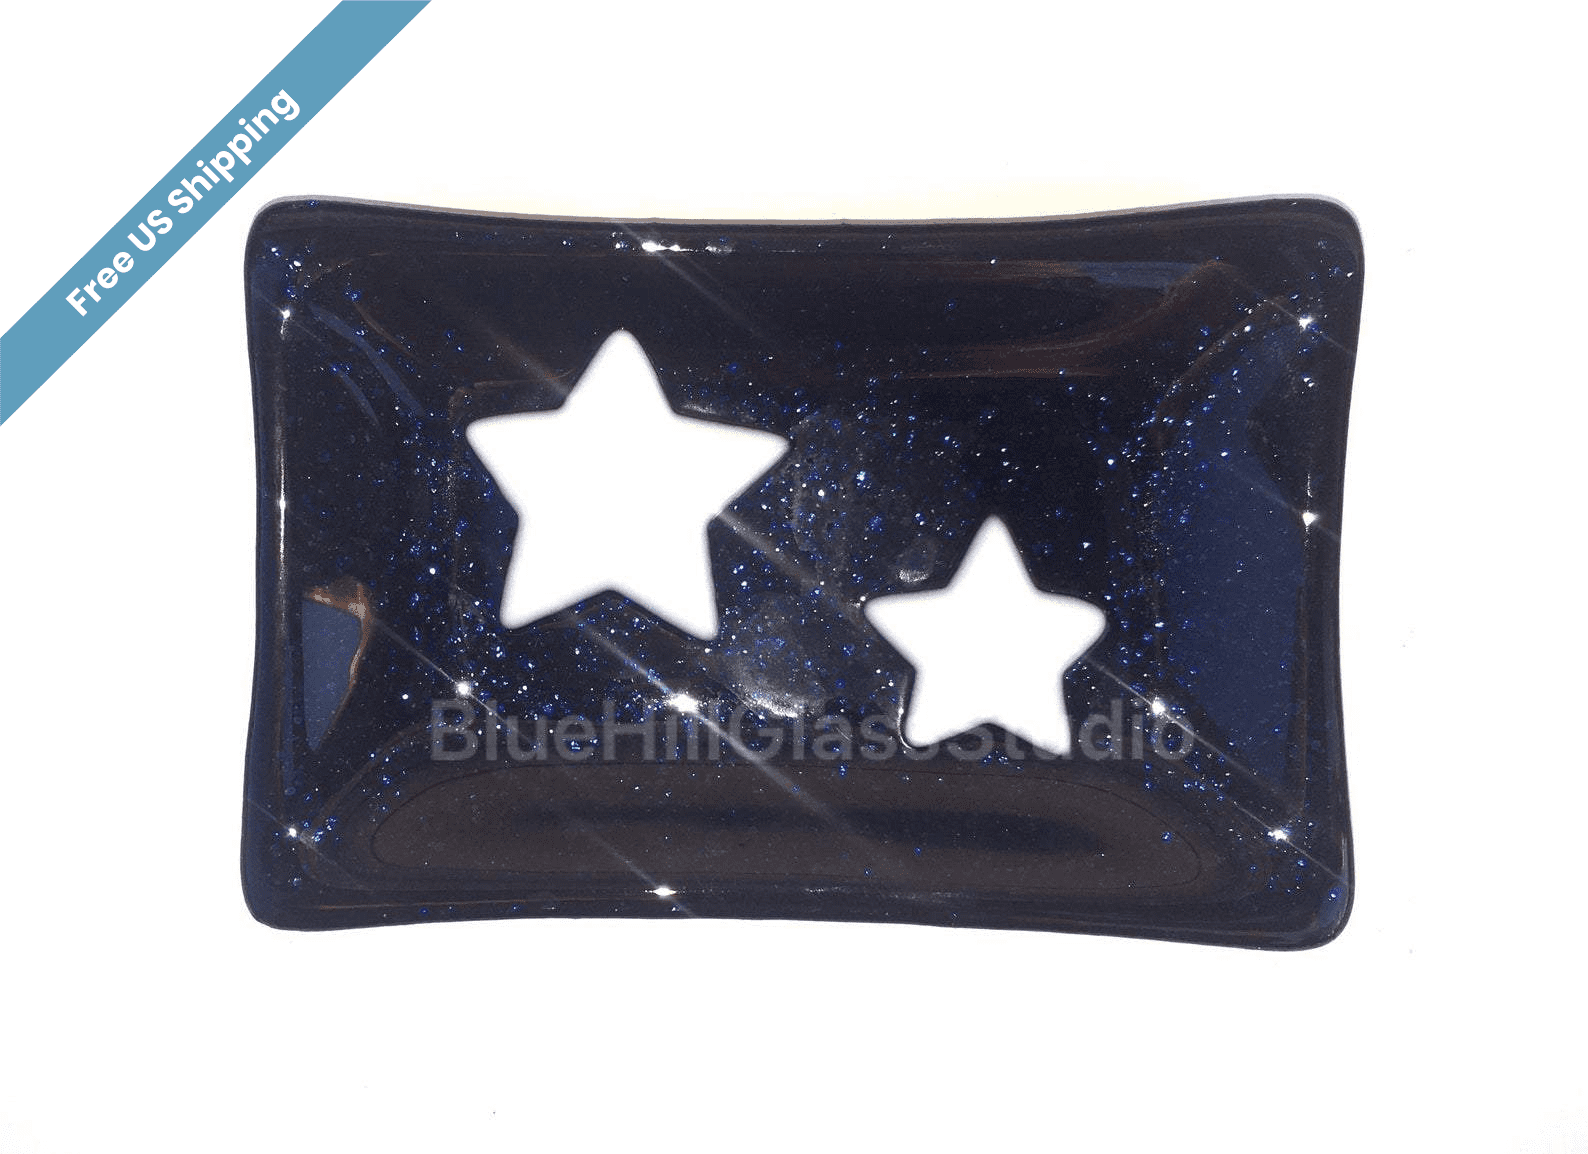 Midnight Galaxy and Stars Fused Glass Trinket or Soap Dish